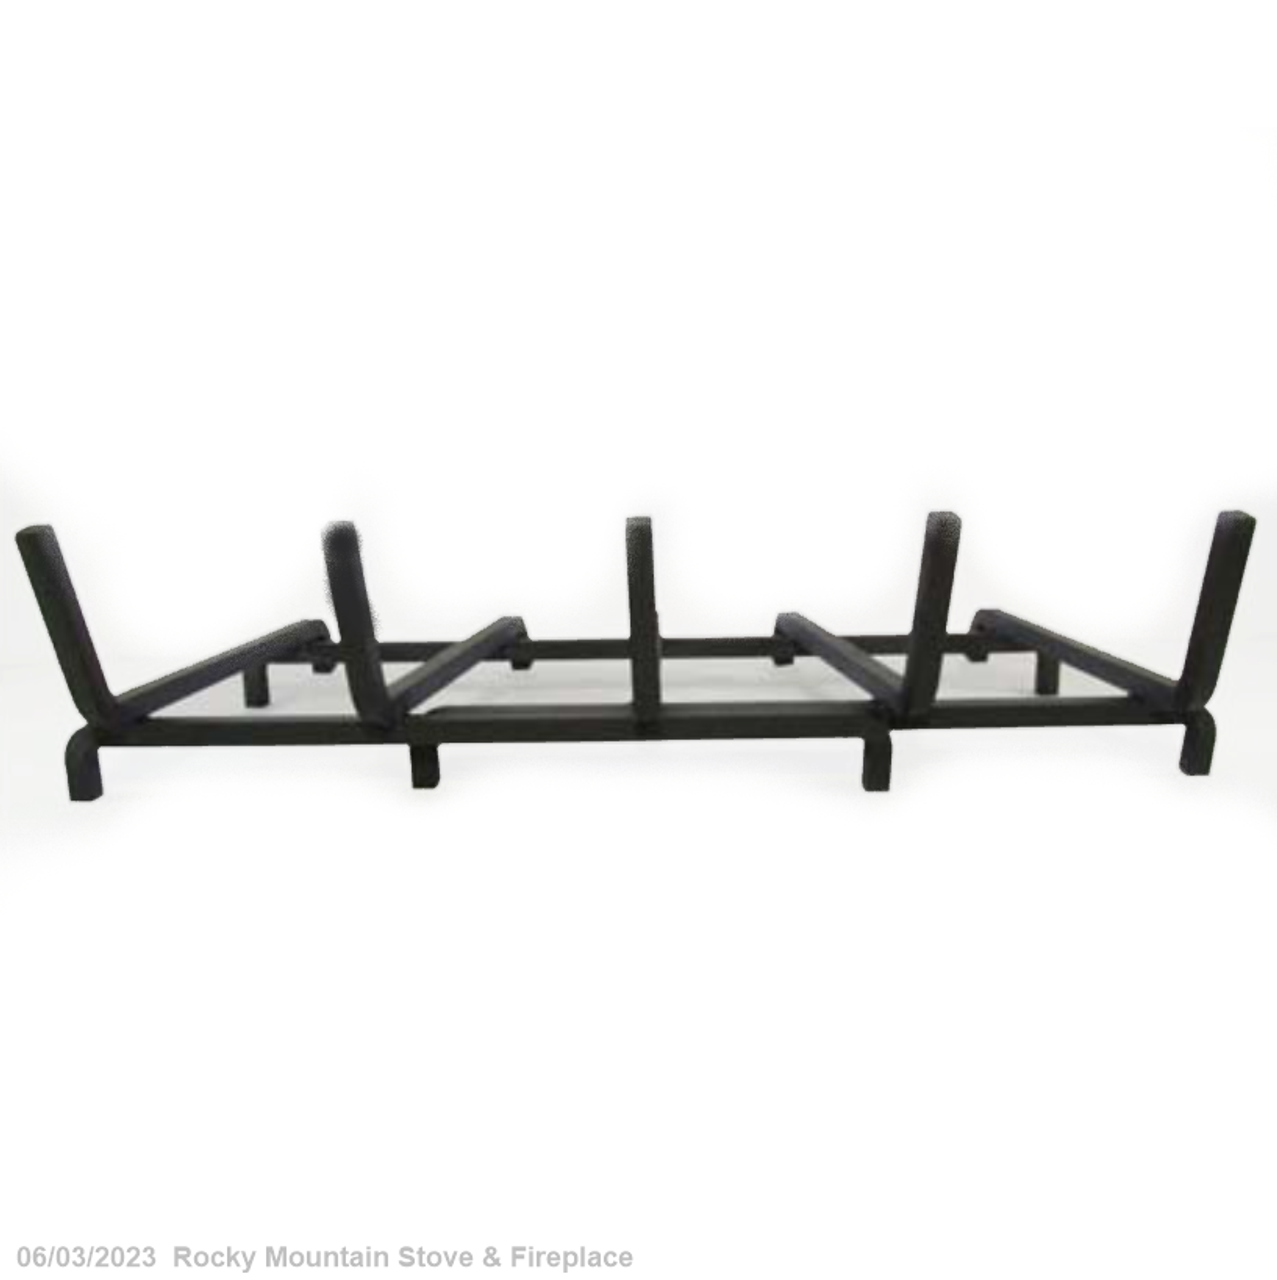 FPX Wood Burning Fireplace Log Grate 98500738